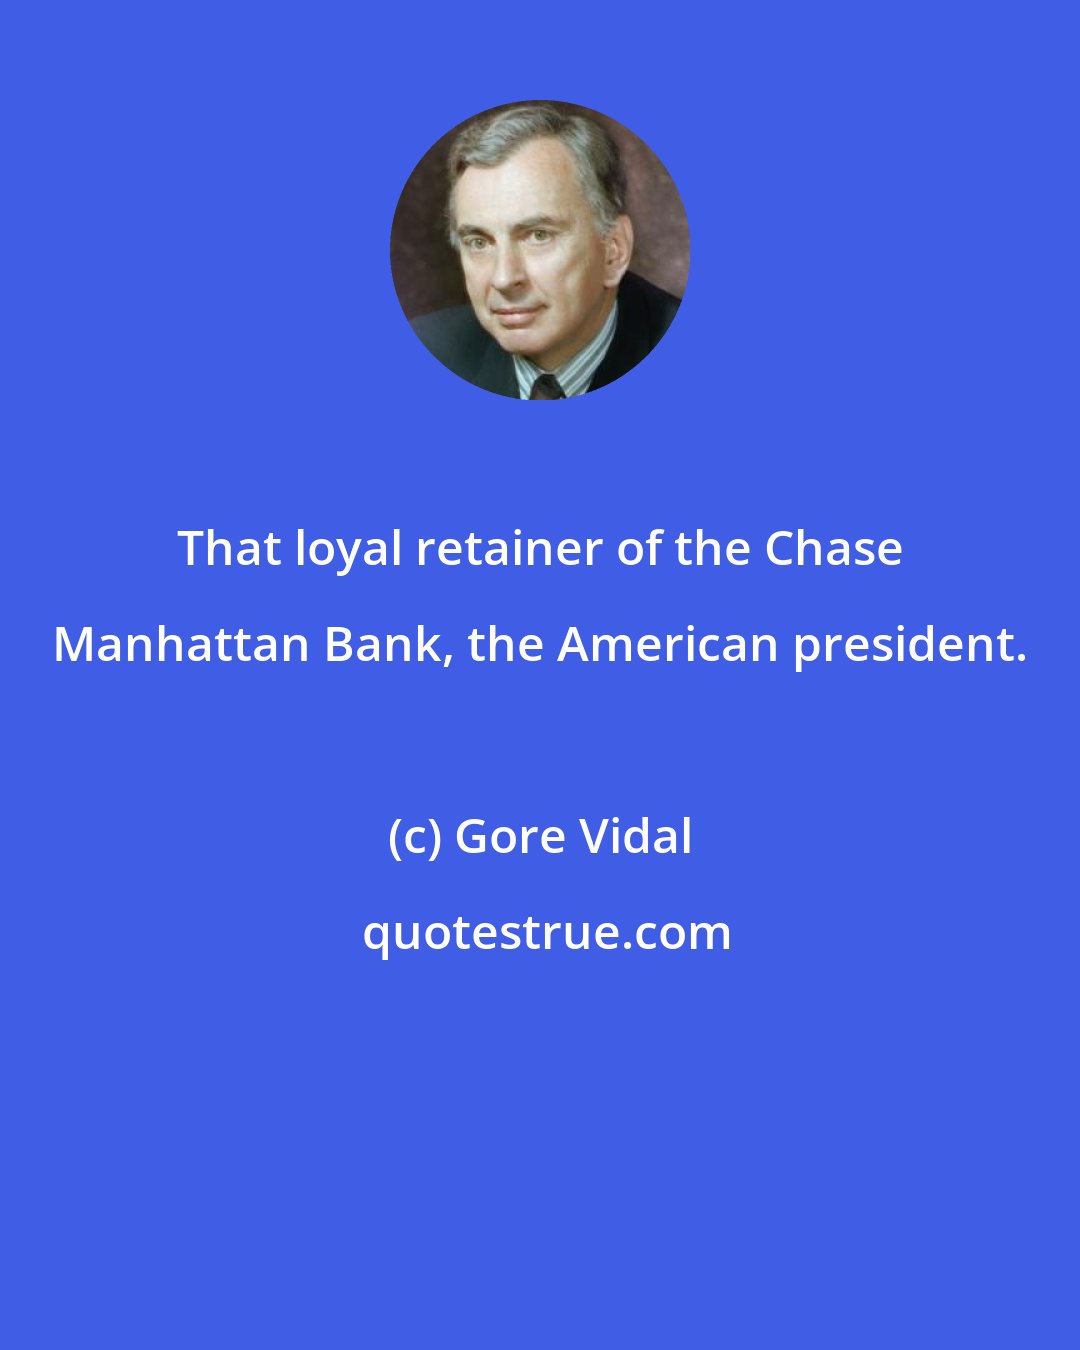 Gore Vidal: That loyal retainer of the Chase Manhattan Bank, the American president.